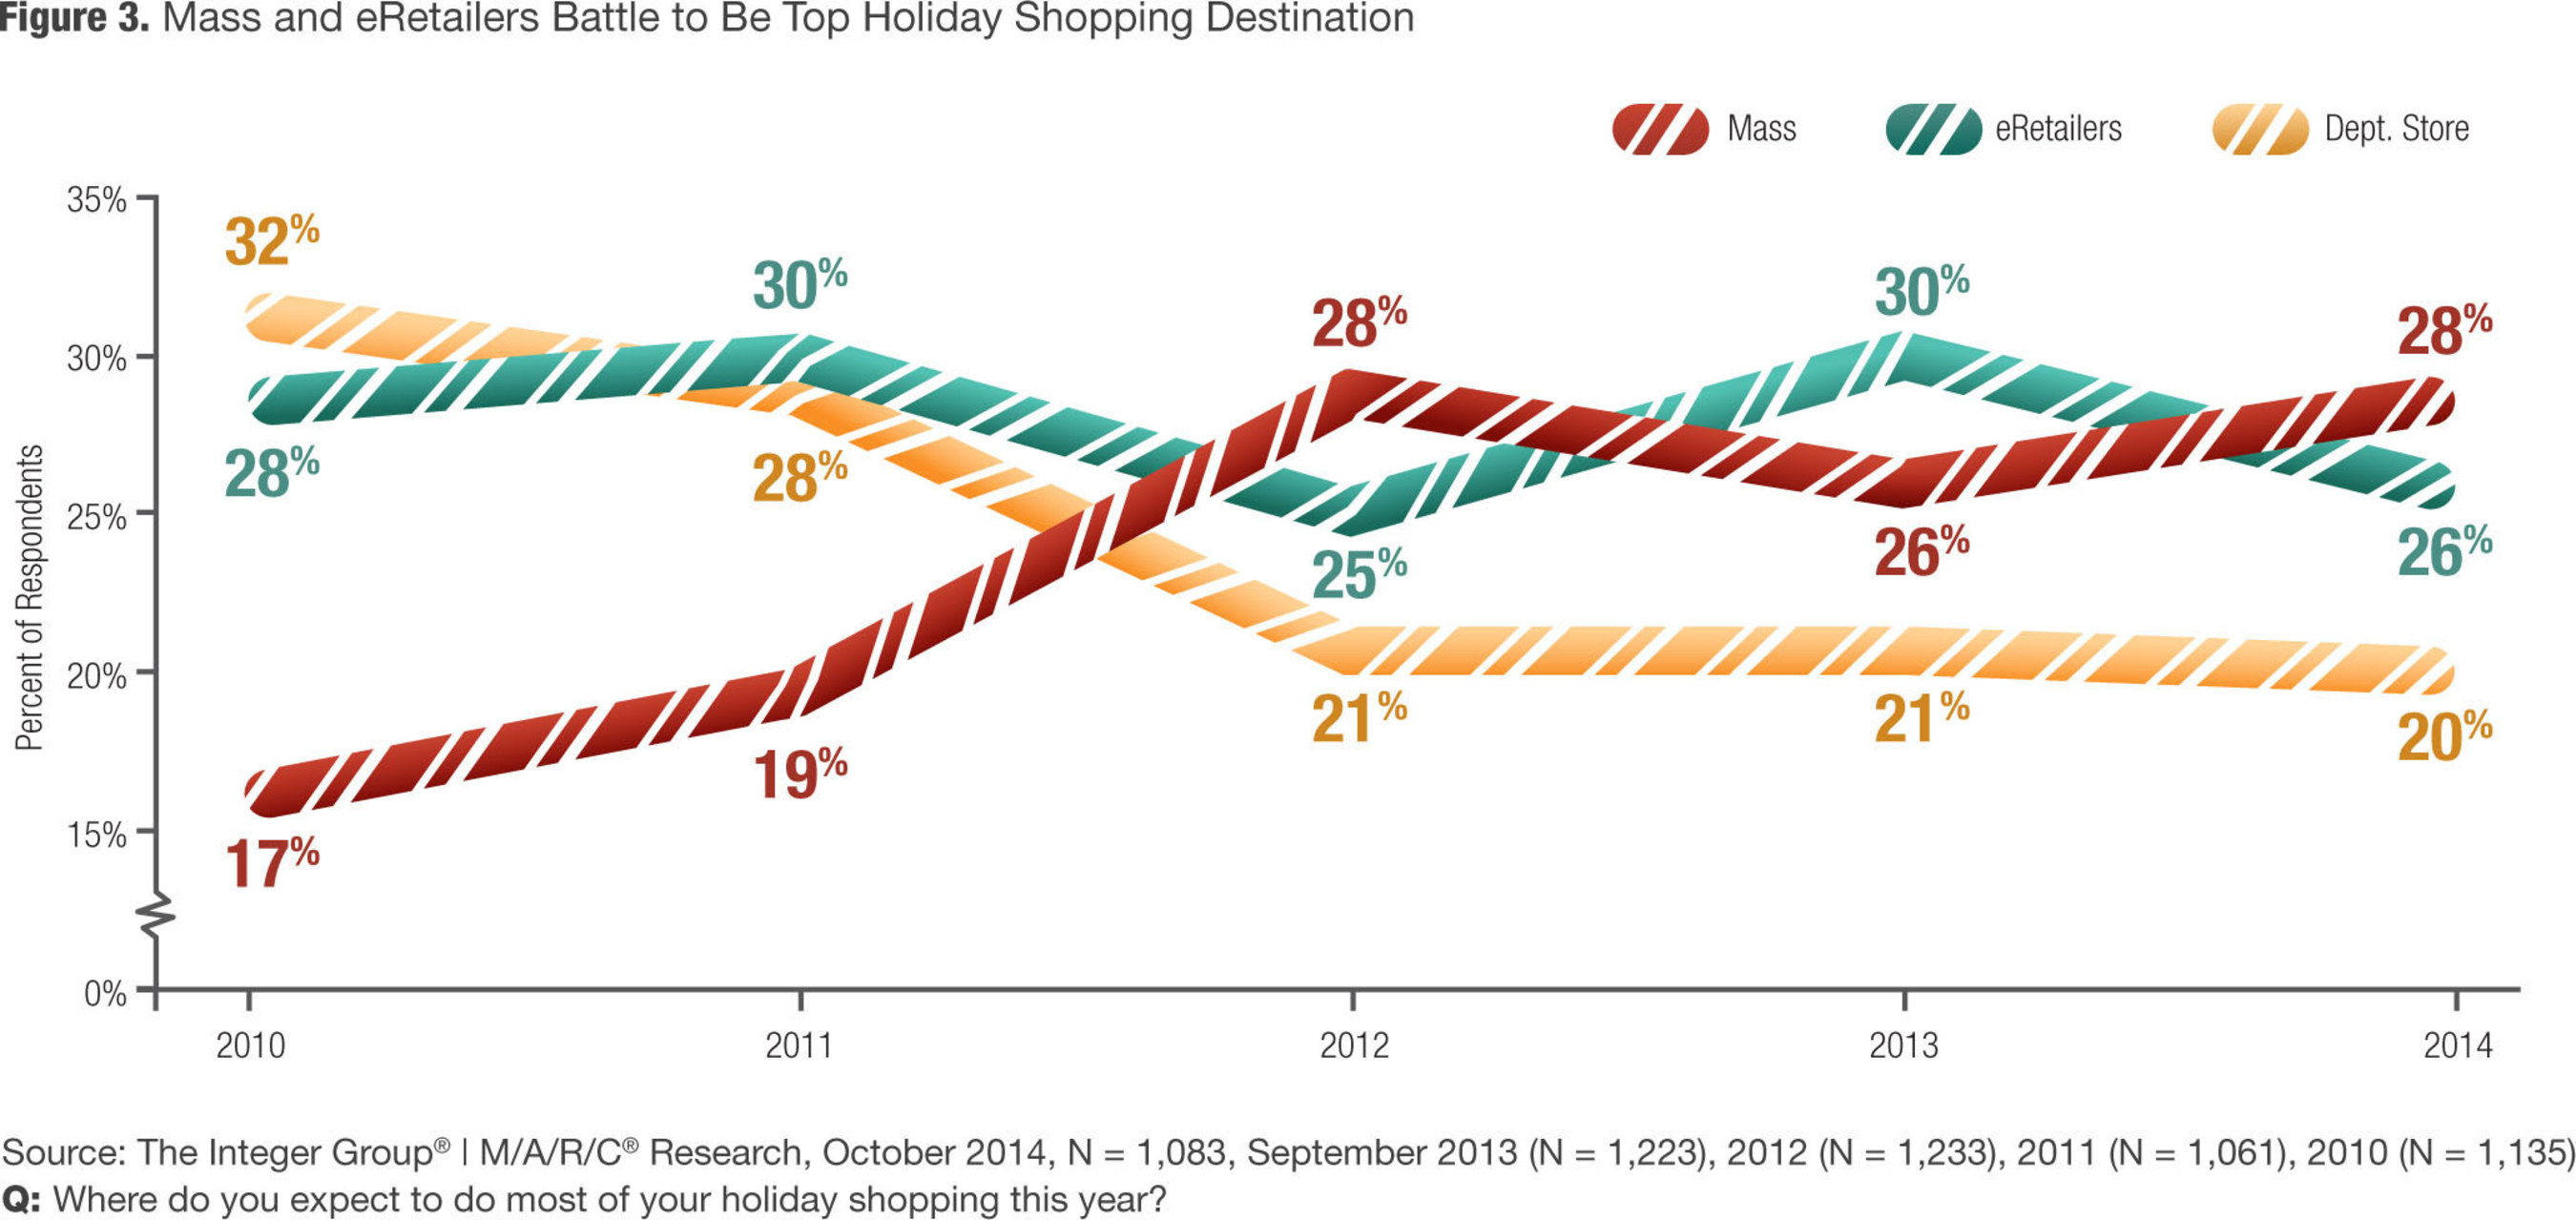 Mass and eRetailers battle to be the top holiday shopping destination this season.